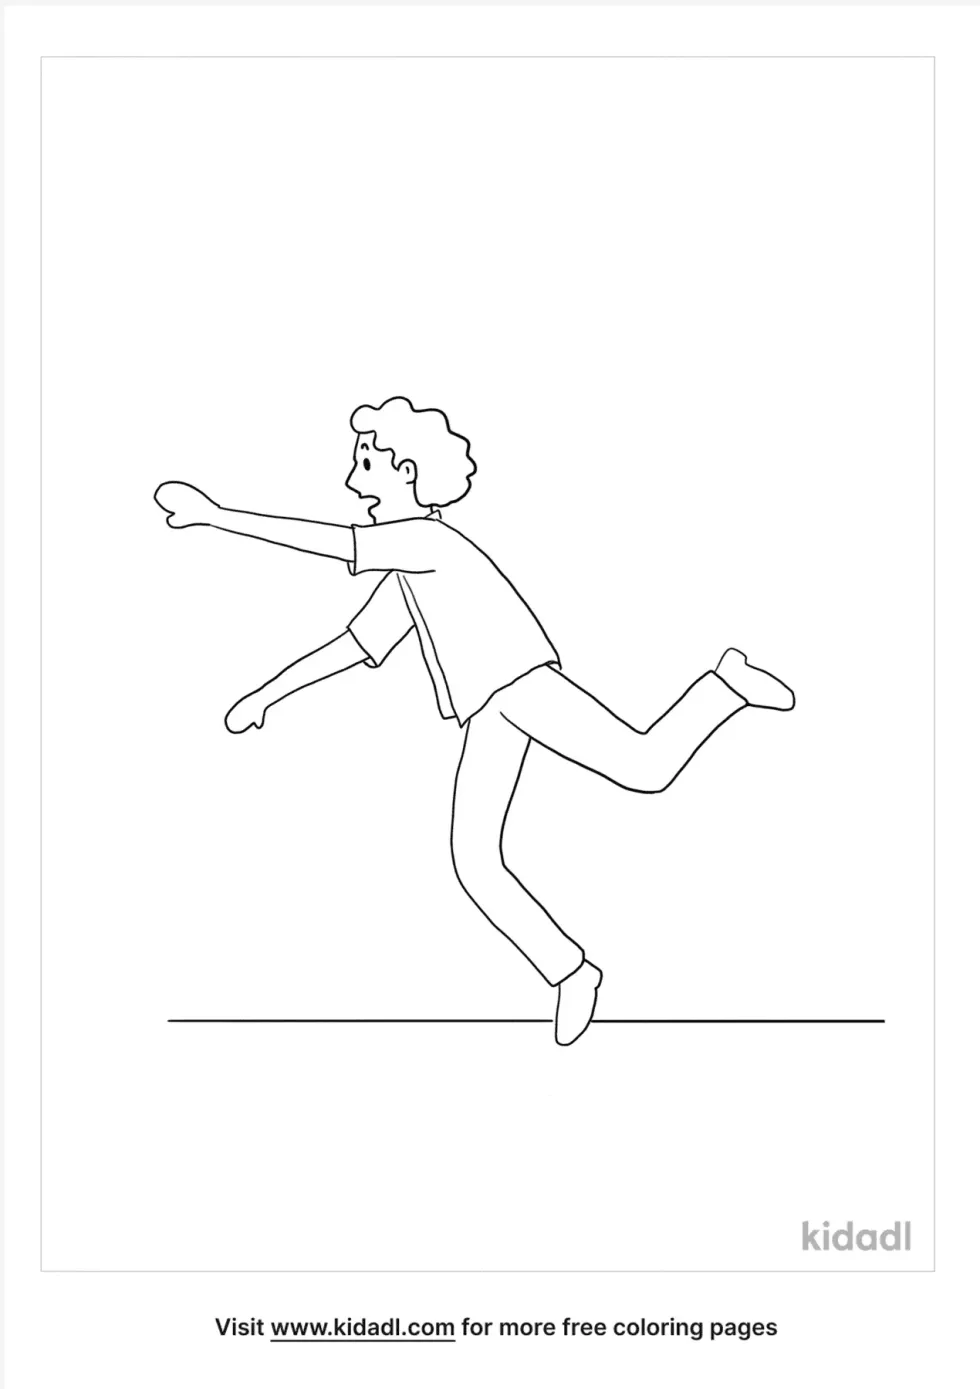 Person Tripping Coloring Page